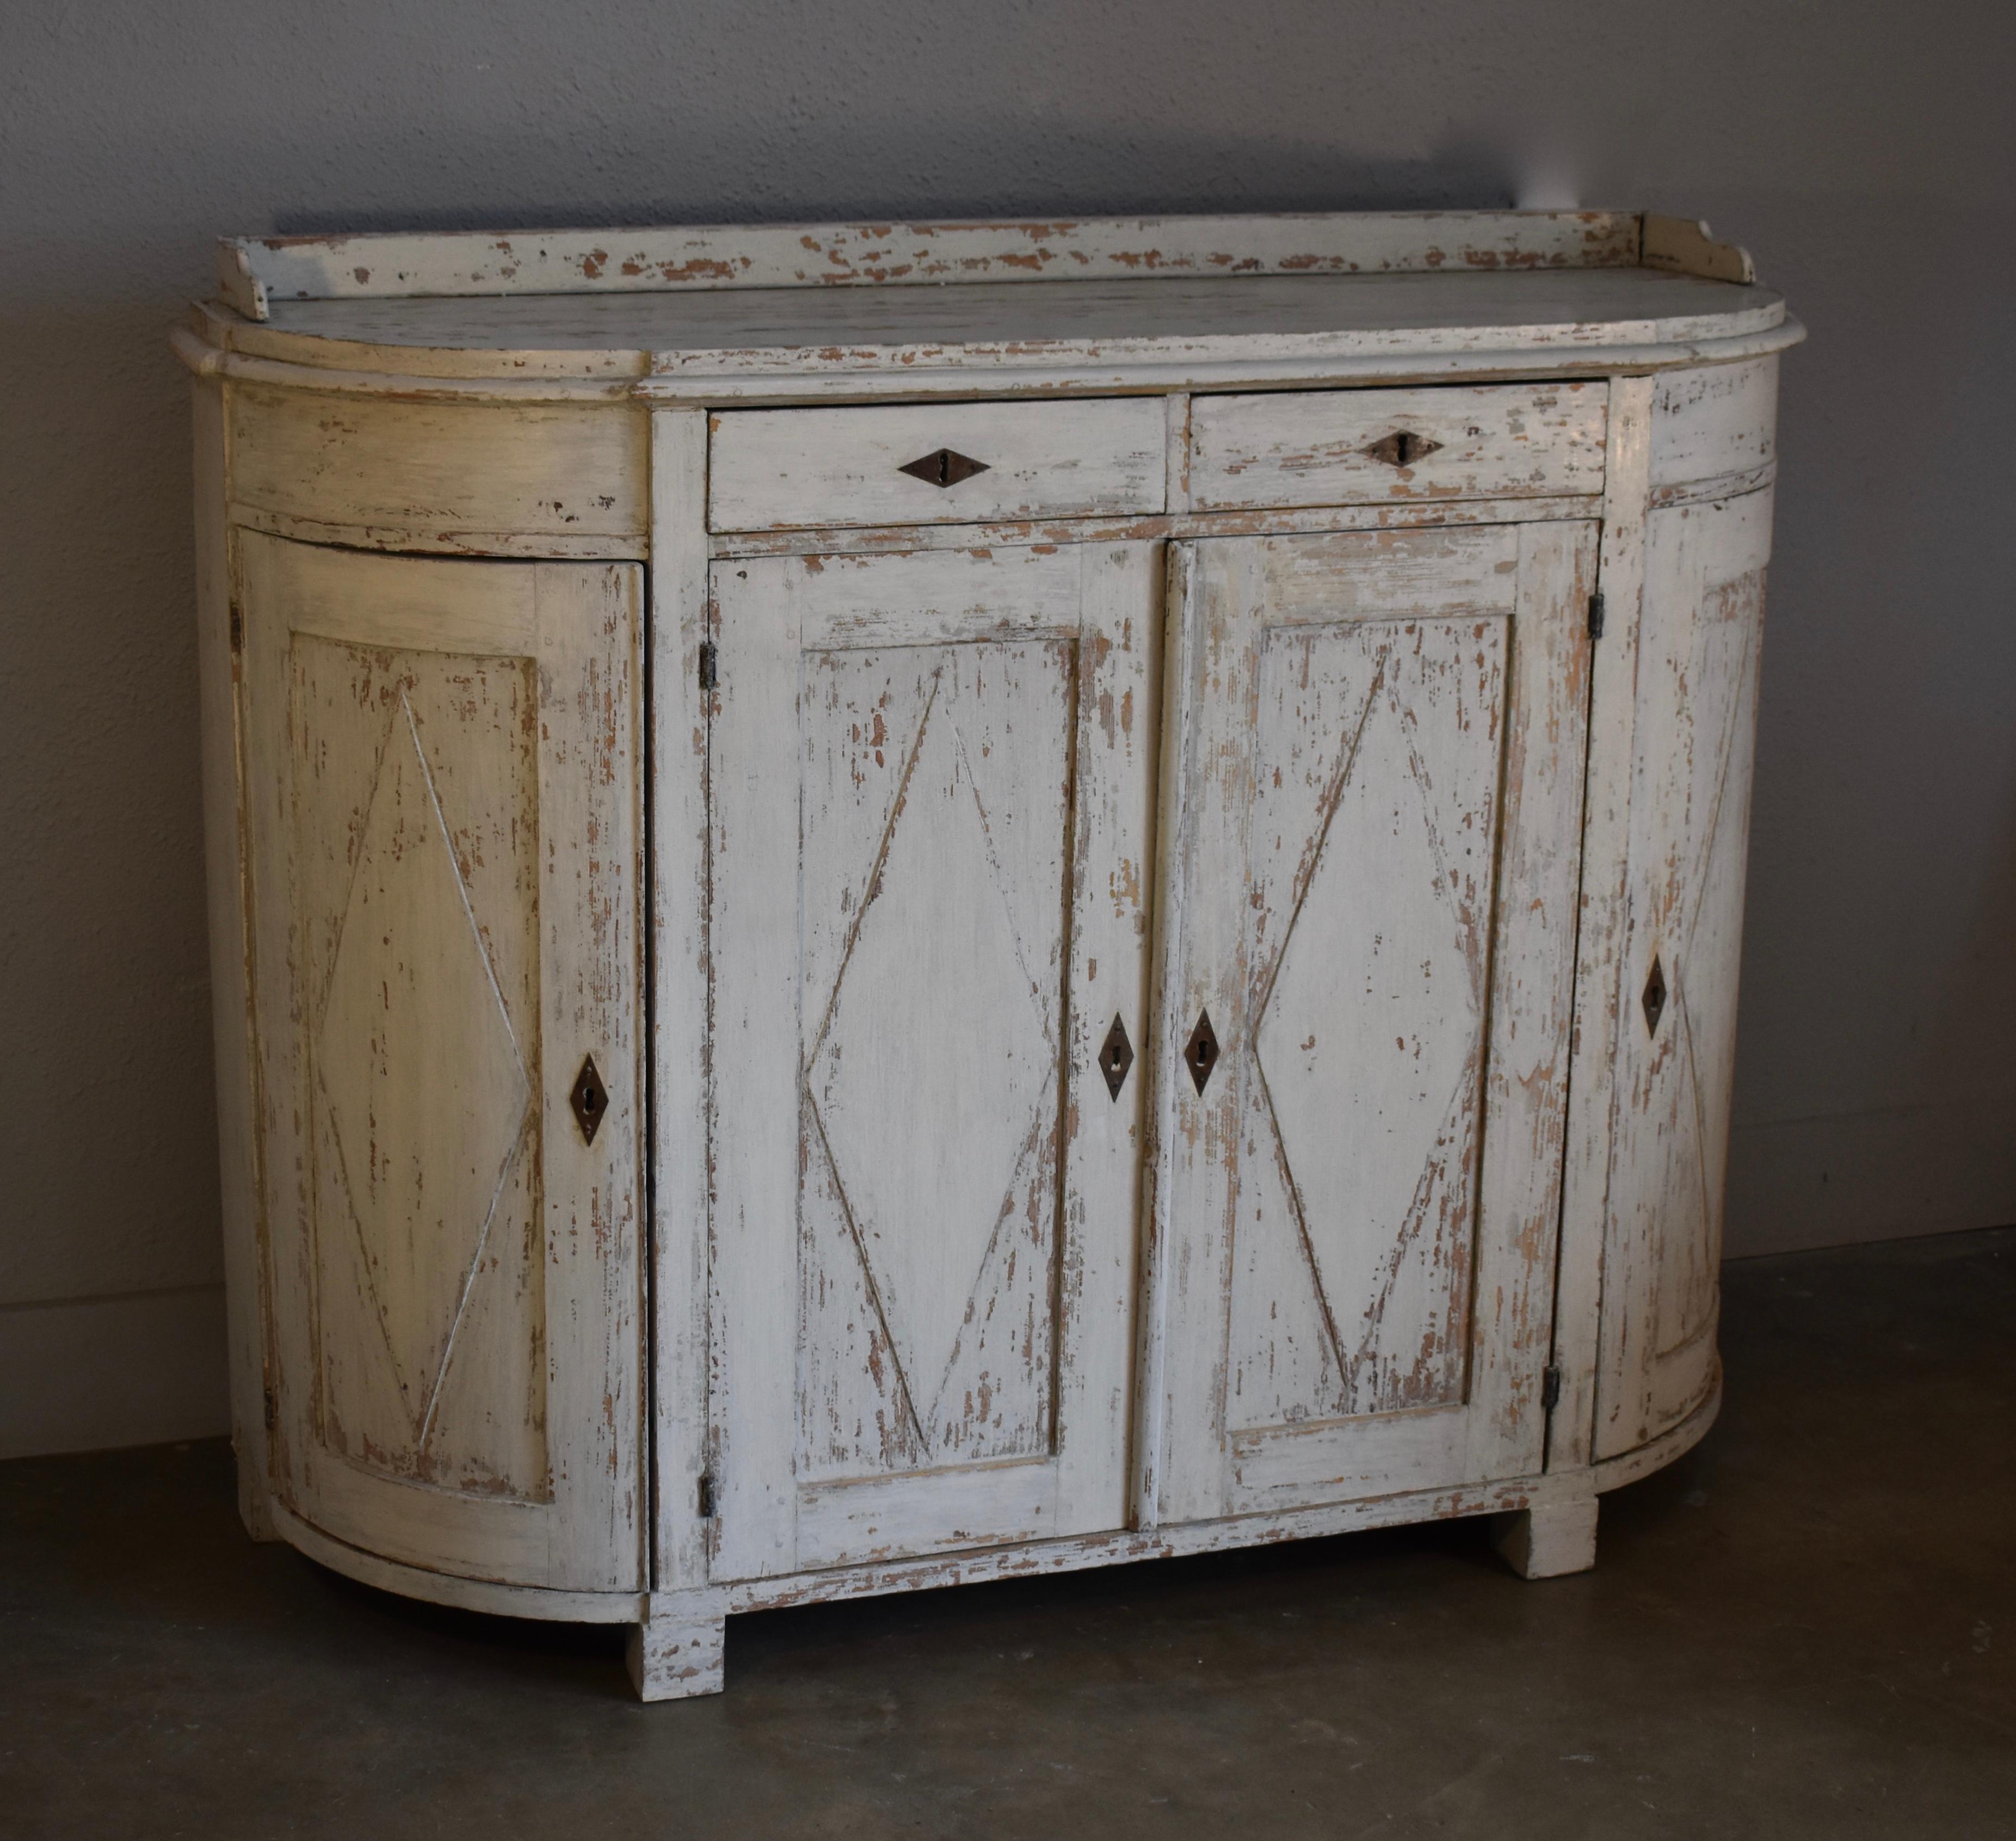 Early 19th century Swedish Gustavian demilune painted four door cupboard. All original with lovely diamond carved paneled doors and three quarter gallery top. Hinges and locks all handmade.